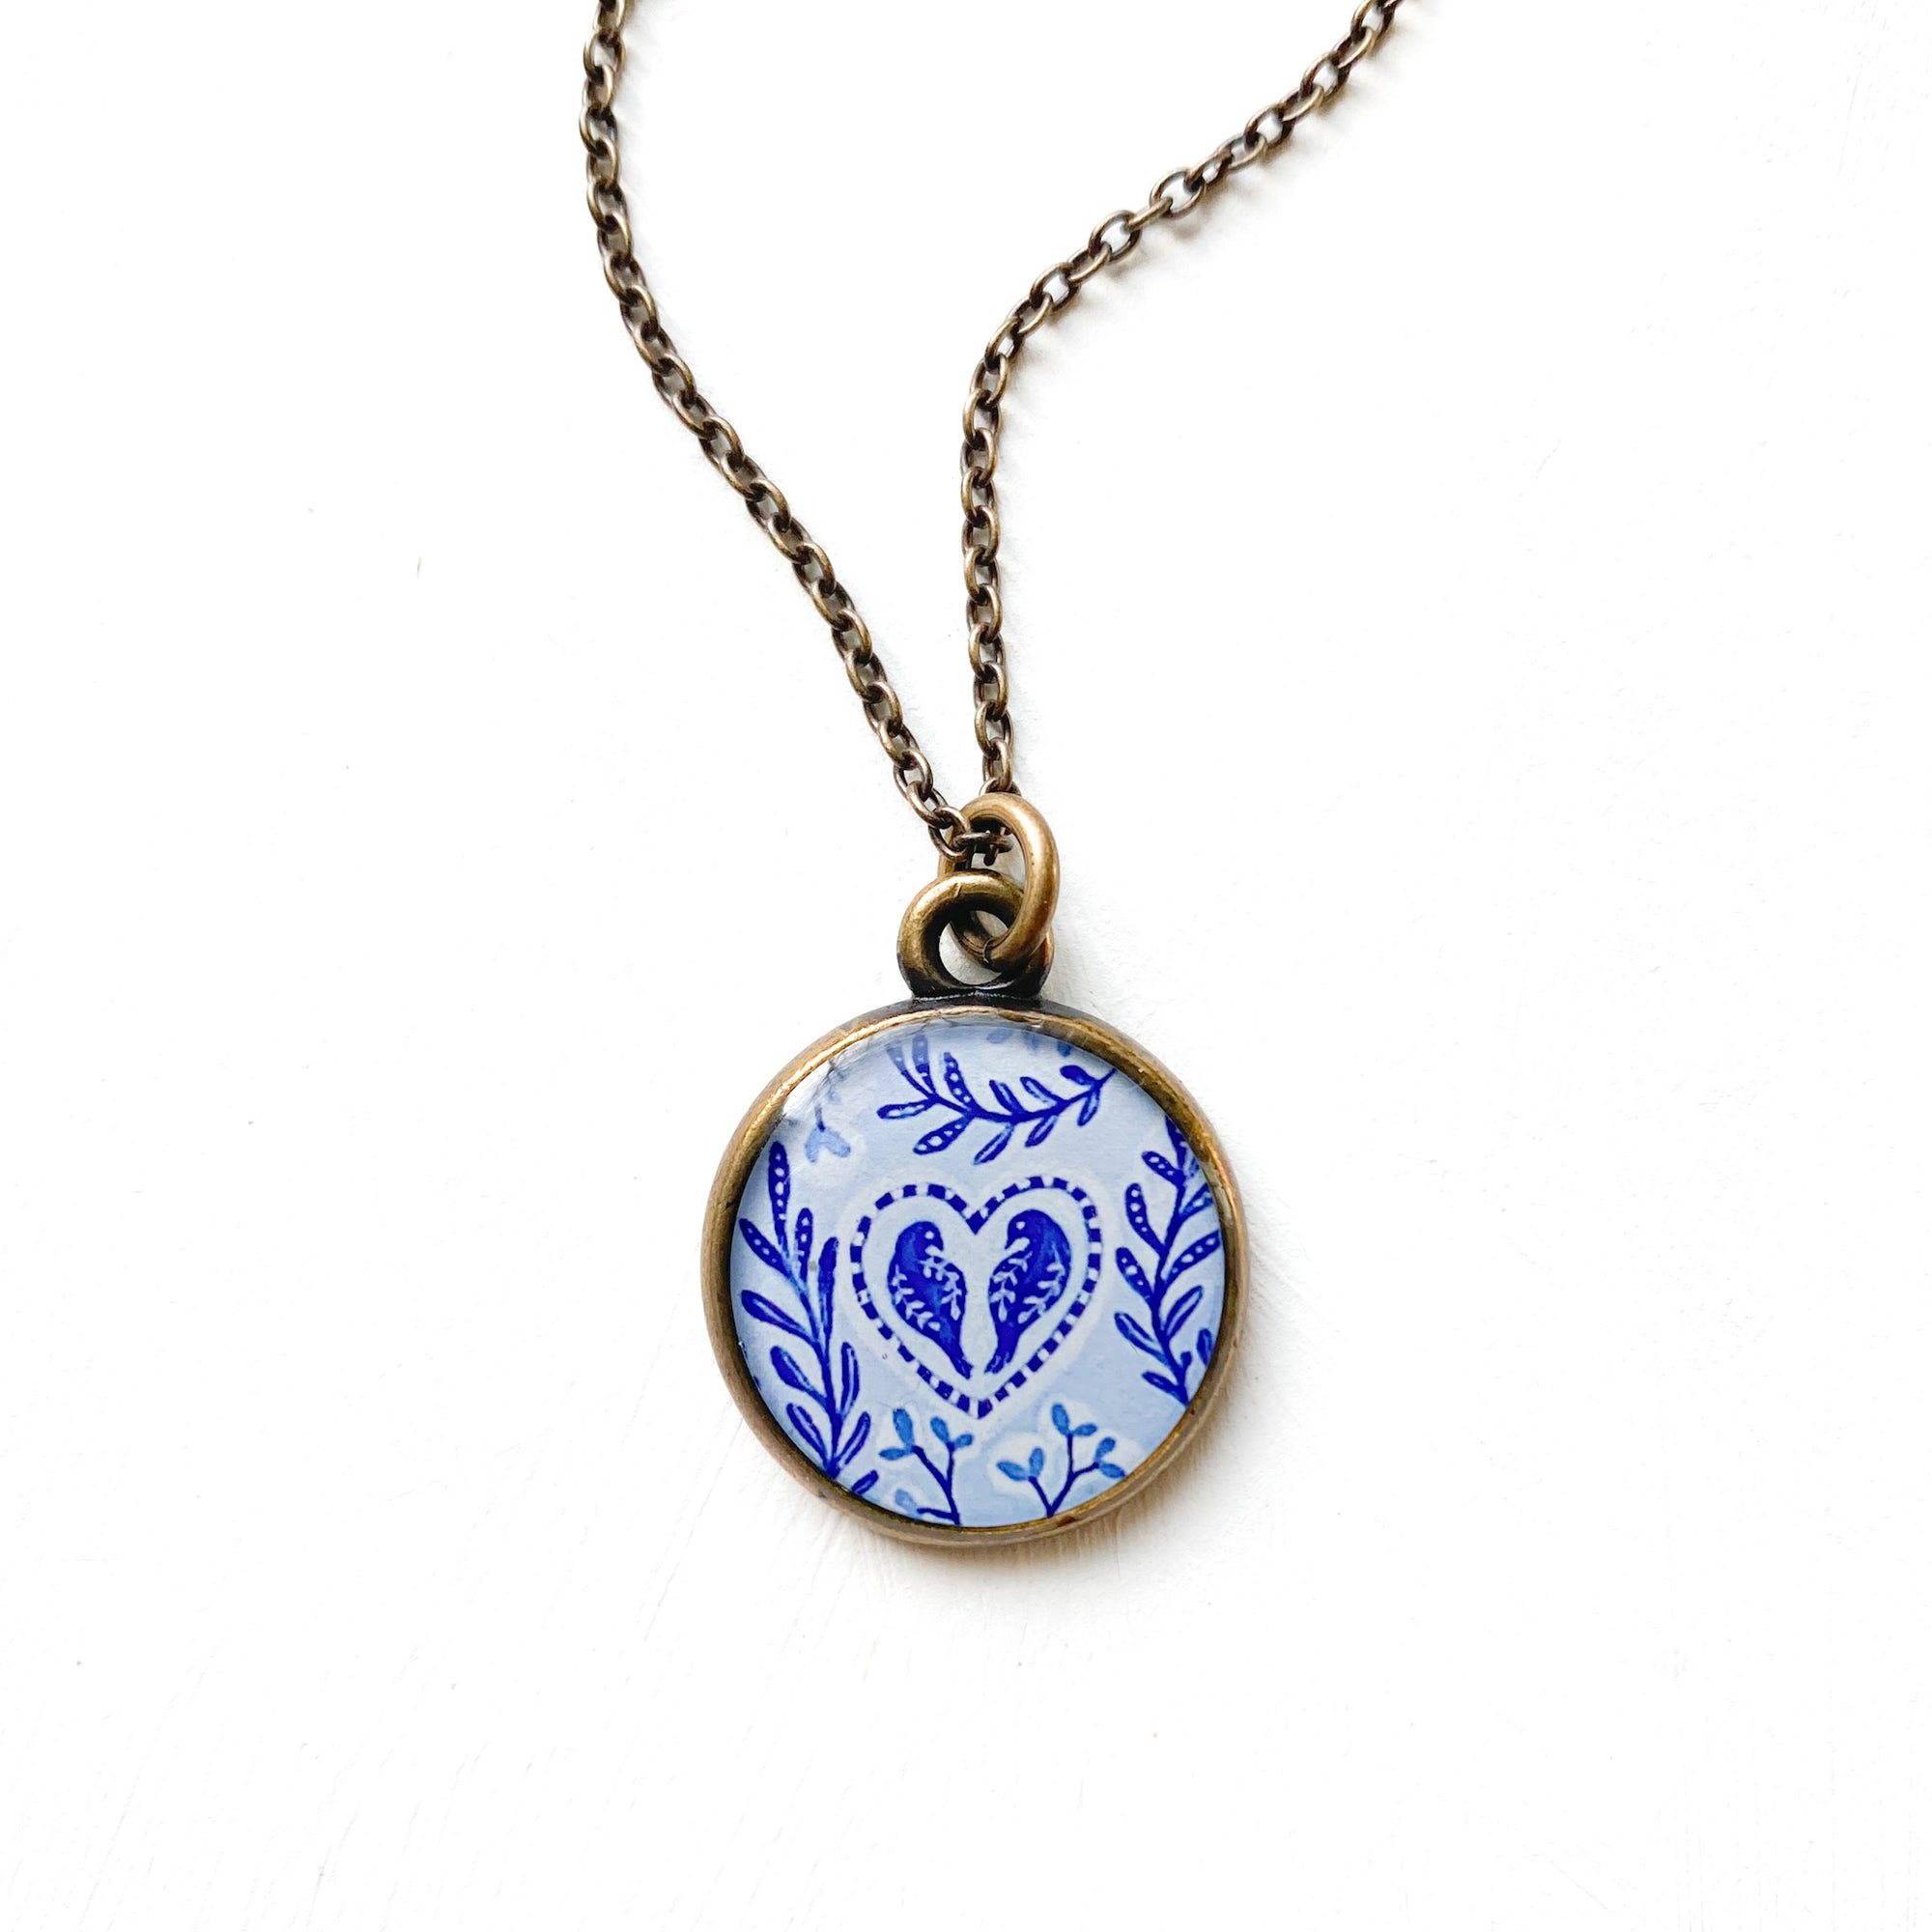 a necklace with a blue and white design on it